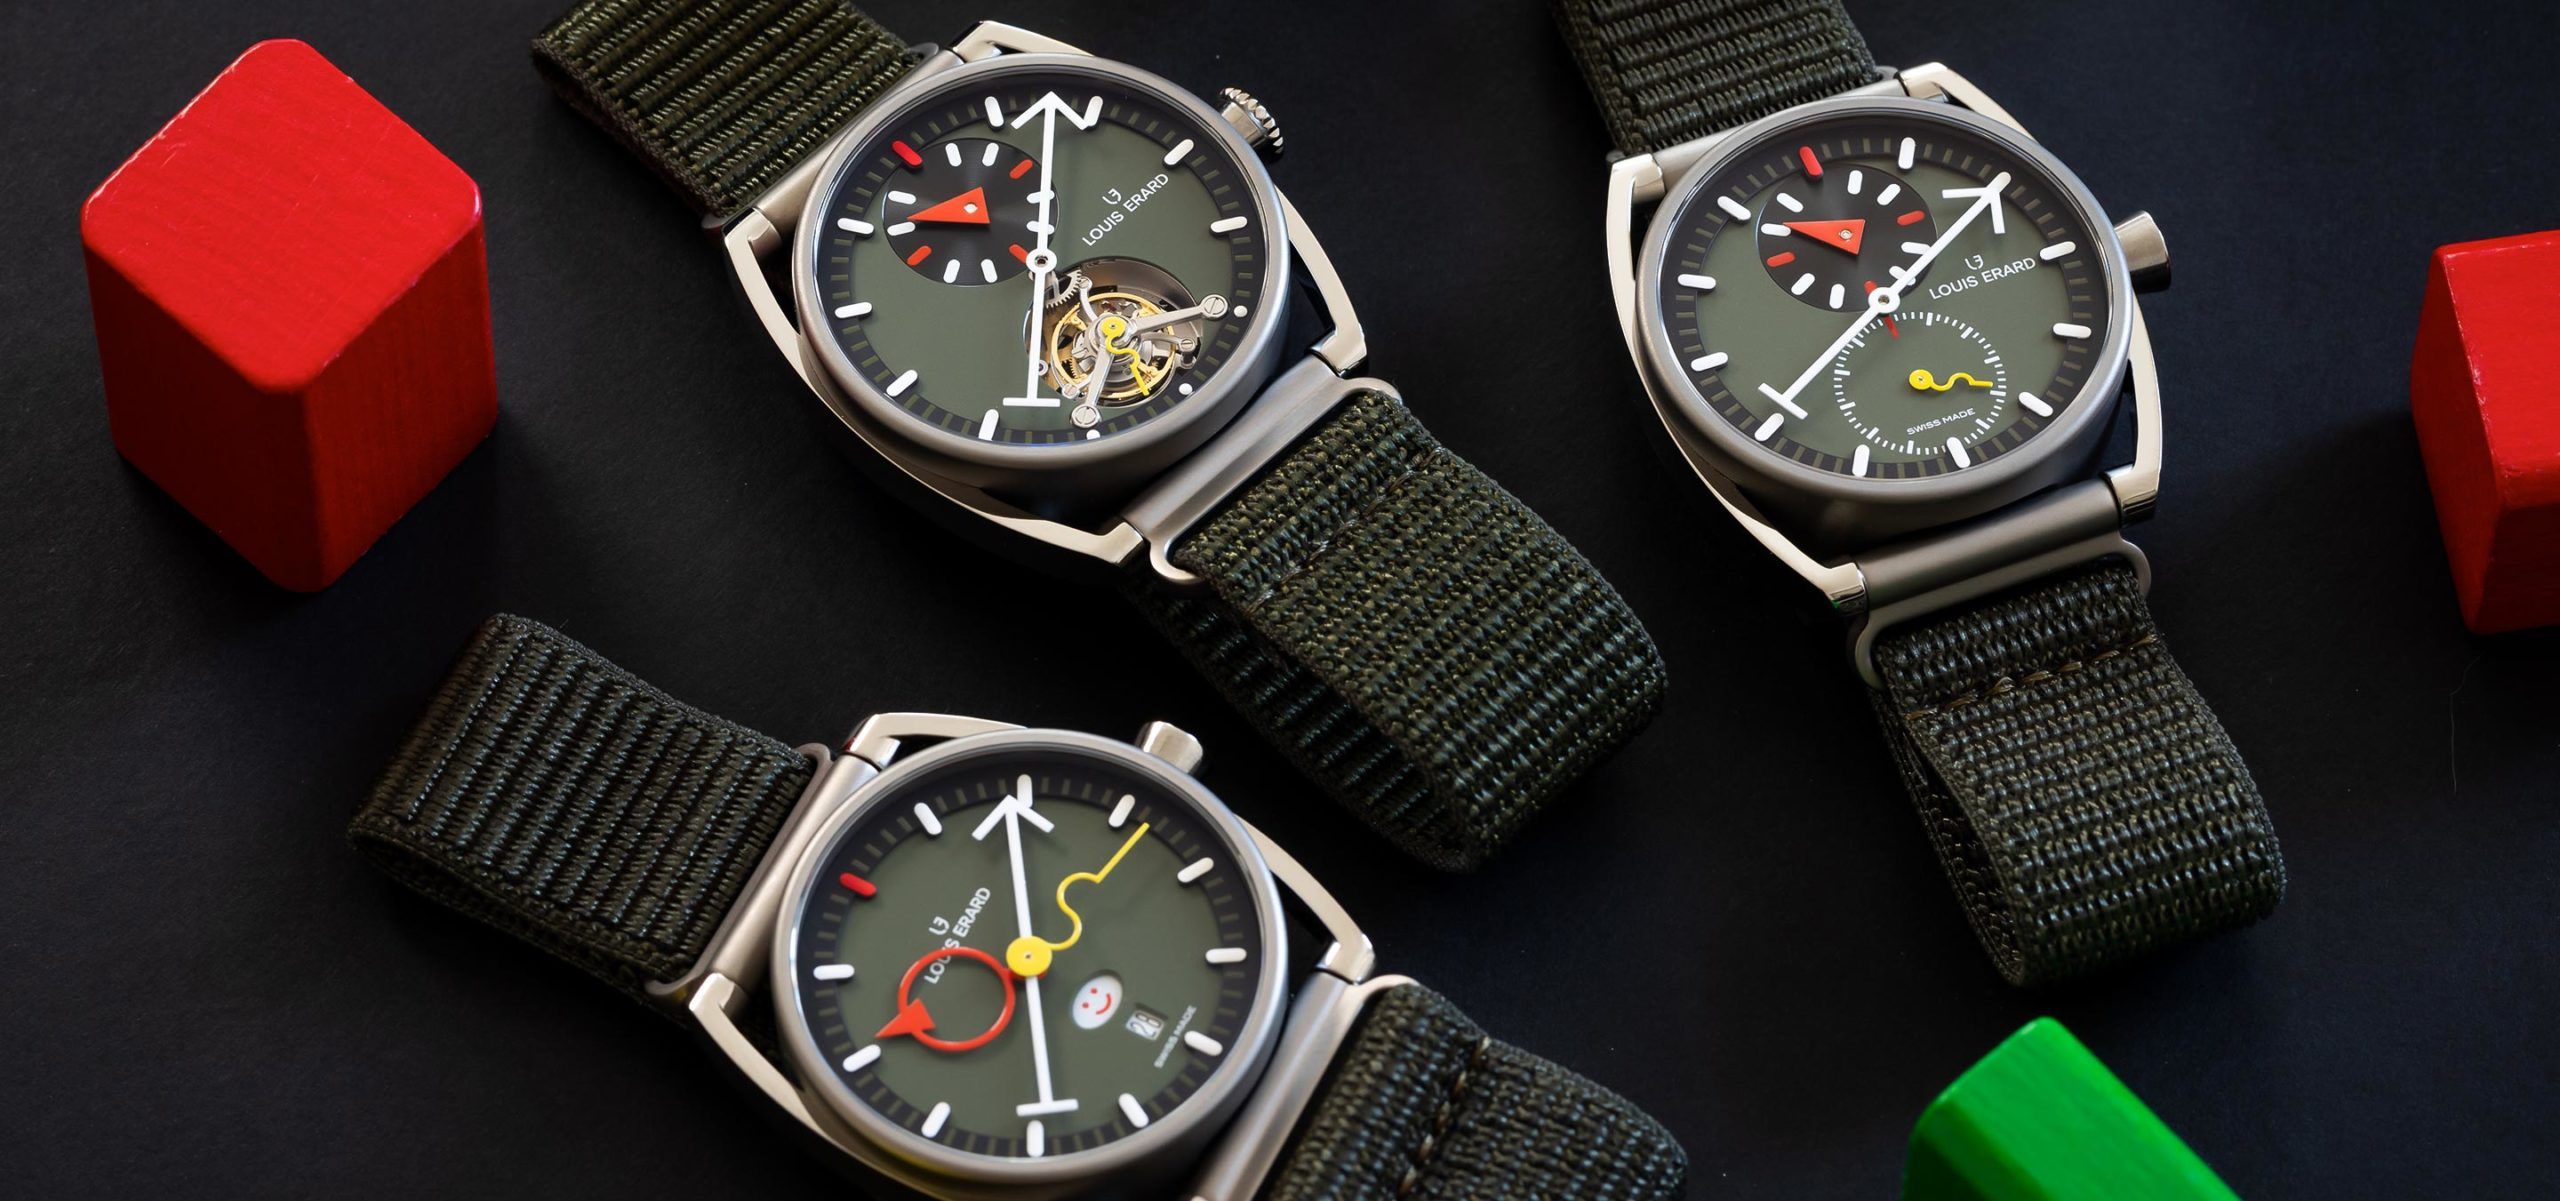 Third Time’s The Charm: Louis Erard Collaborate with Alain Silberstein For ‘Le Triptyque Khaki’ Watches